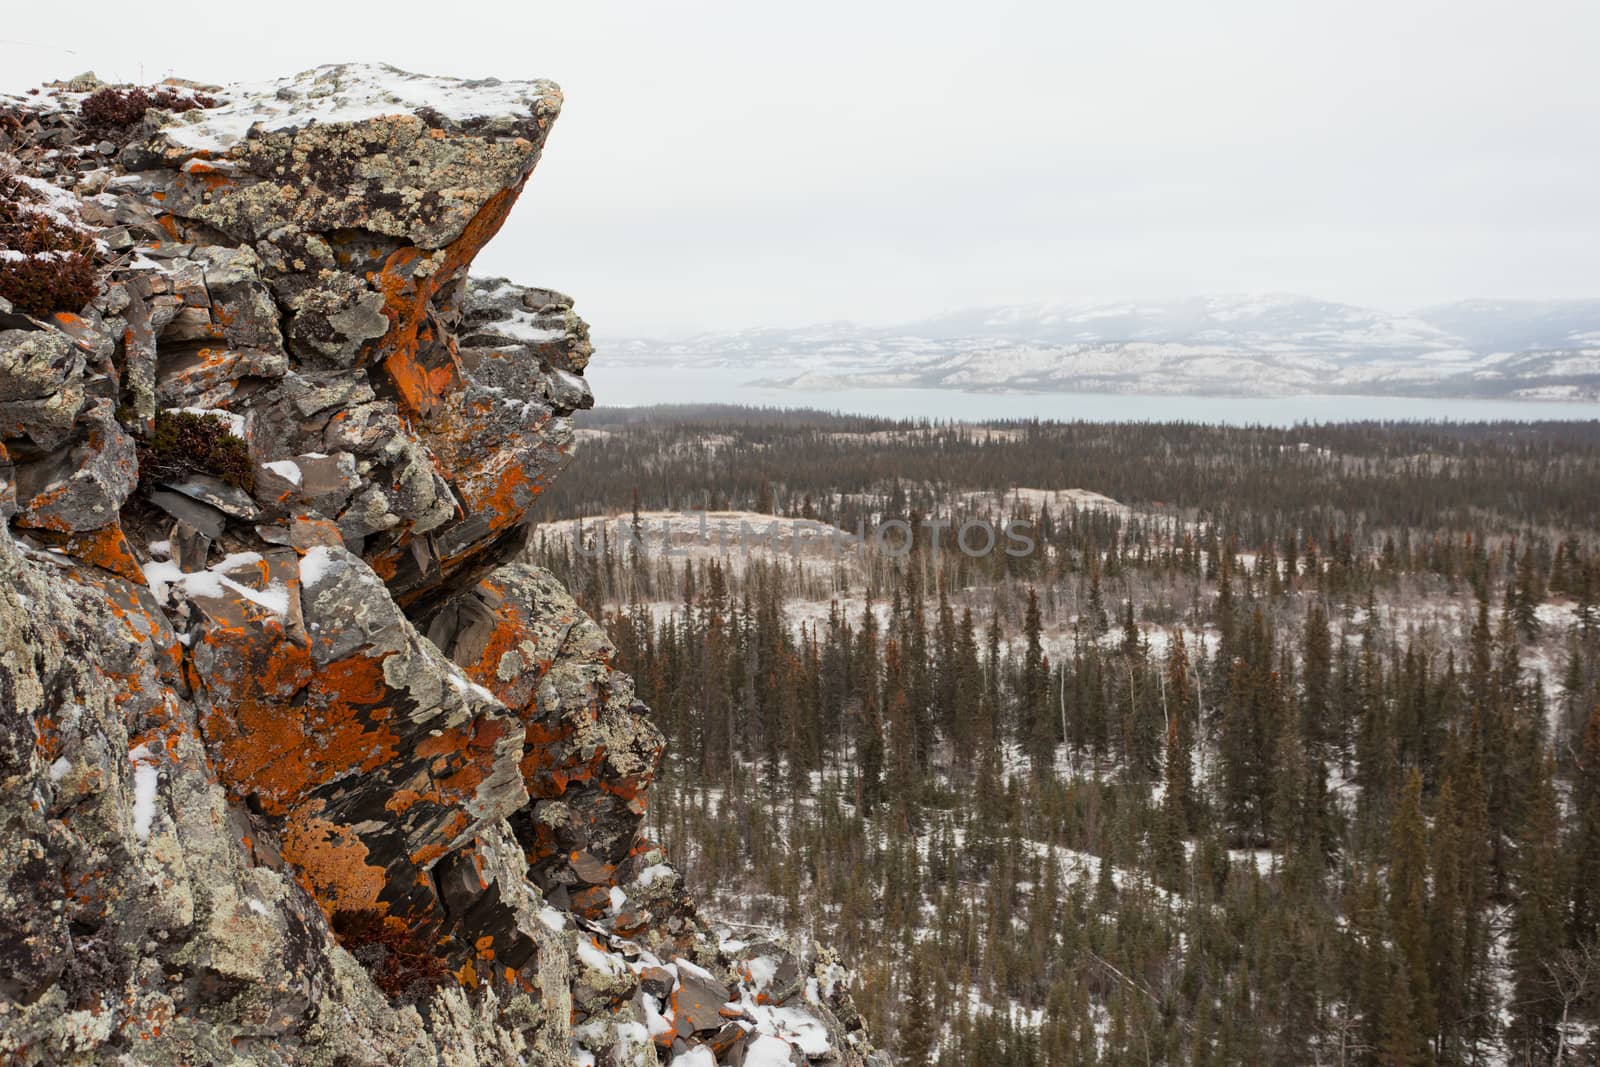 Orange lichens crusted rock over early winter boreal forest taiga wilderness landscape of Lake Laberge, Yukon Territory, Canada